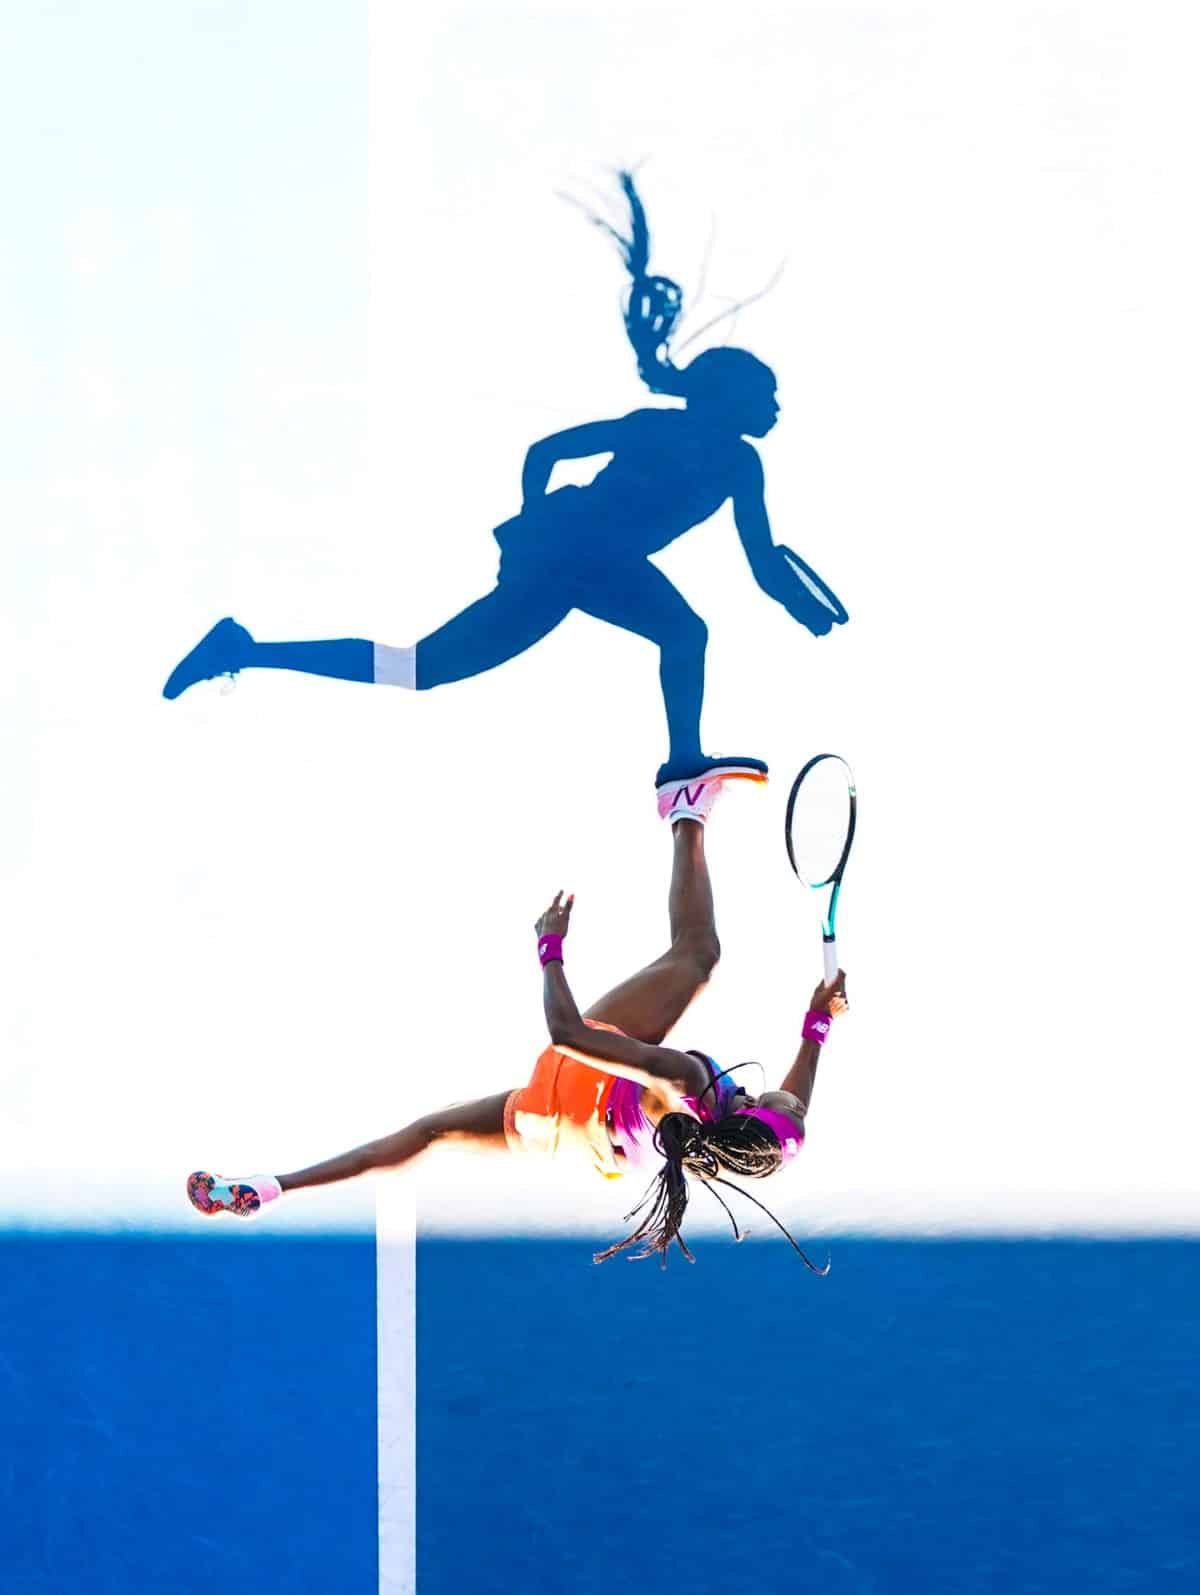 The shadow cast by Coco Gauff (USA) as she serves during Round 1 of the Australian Open